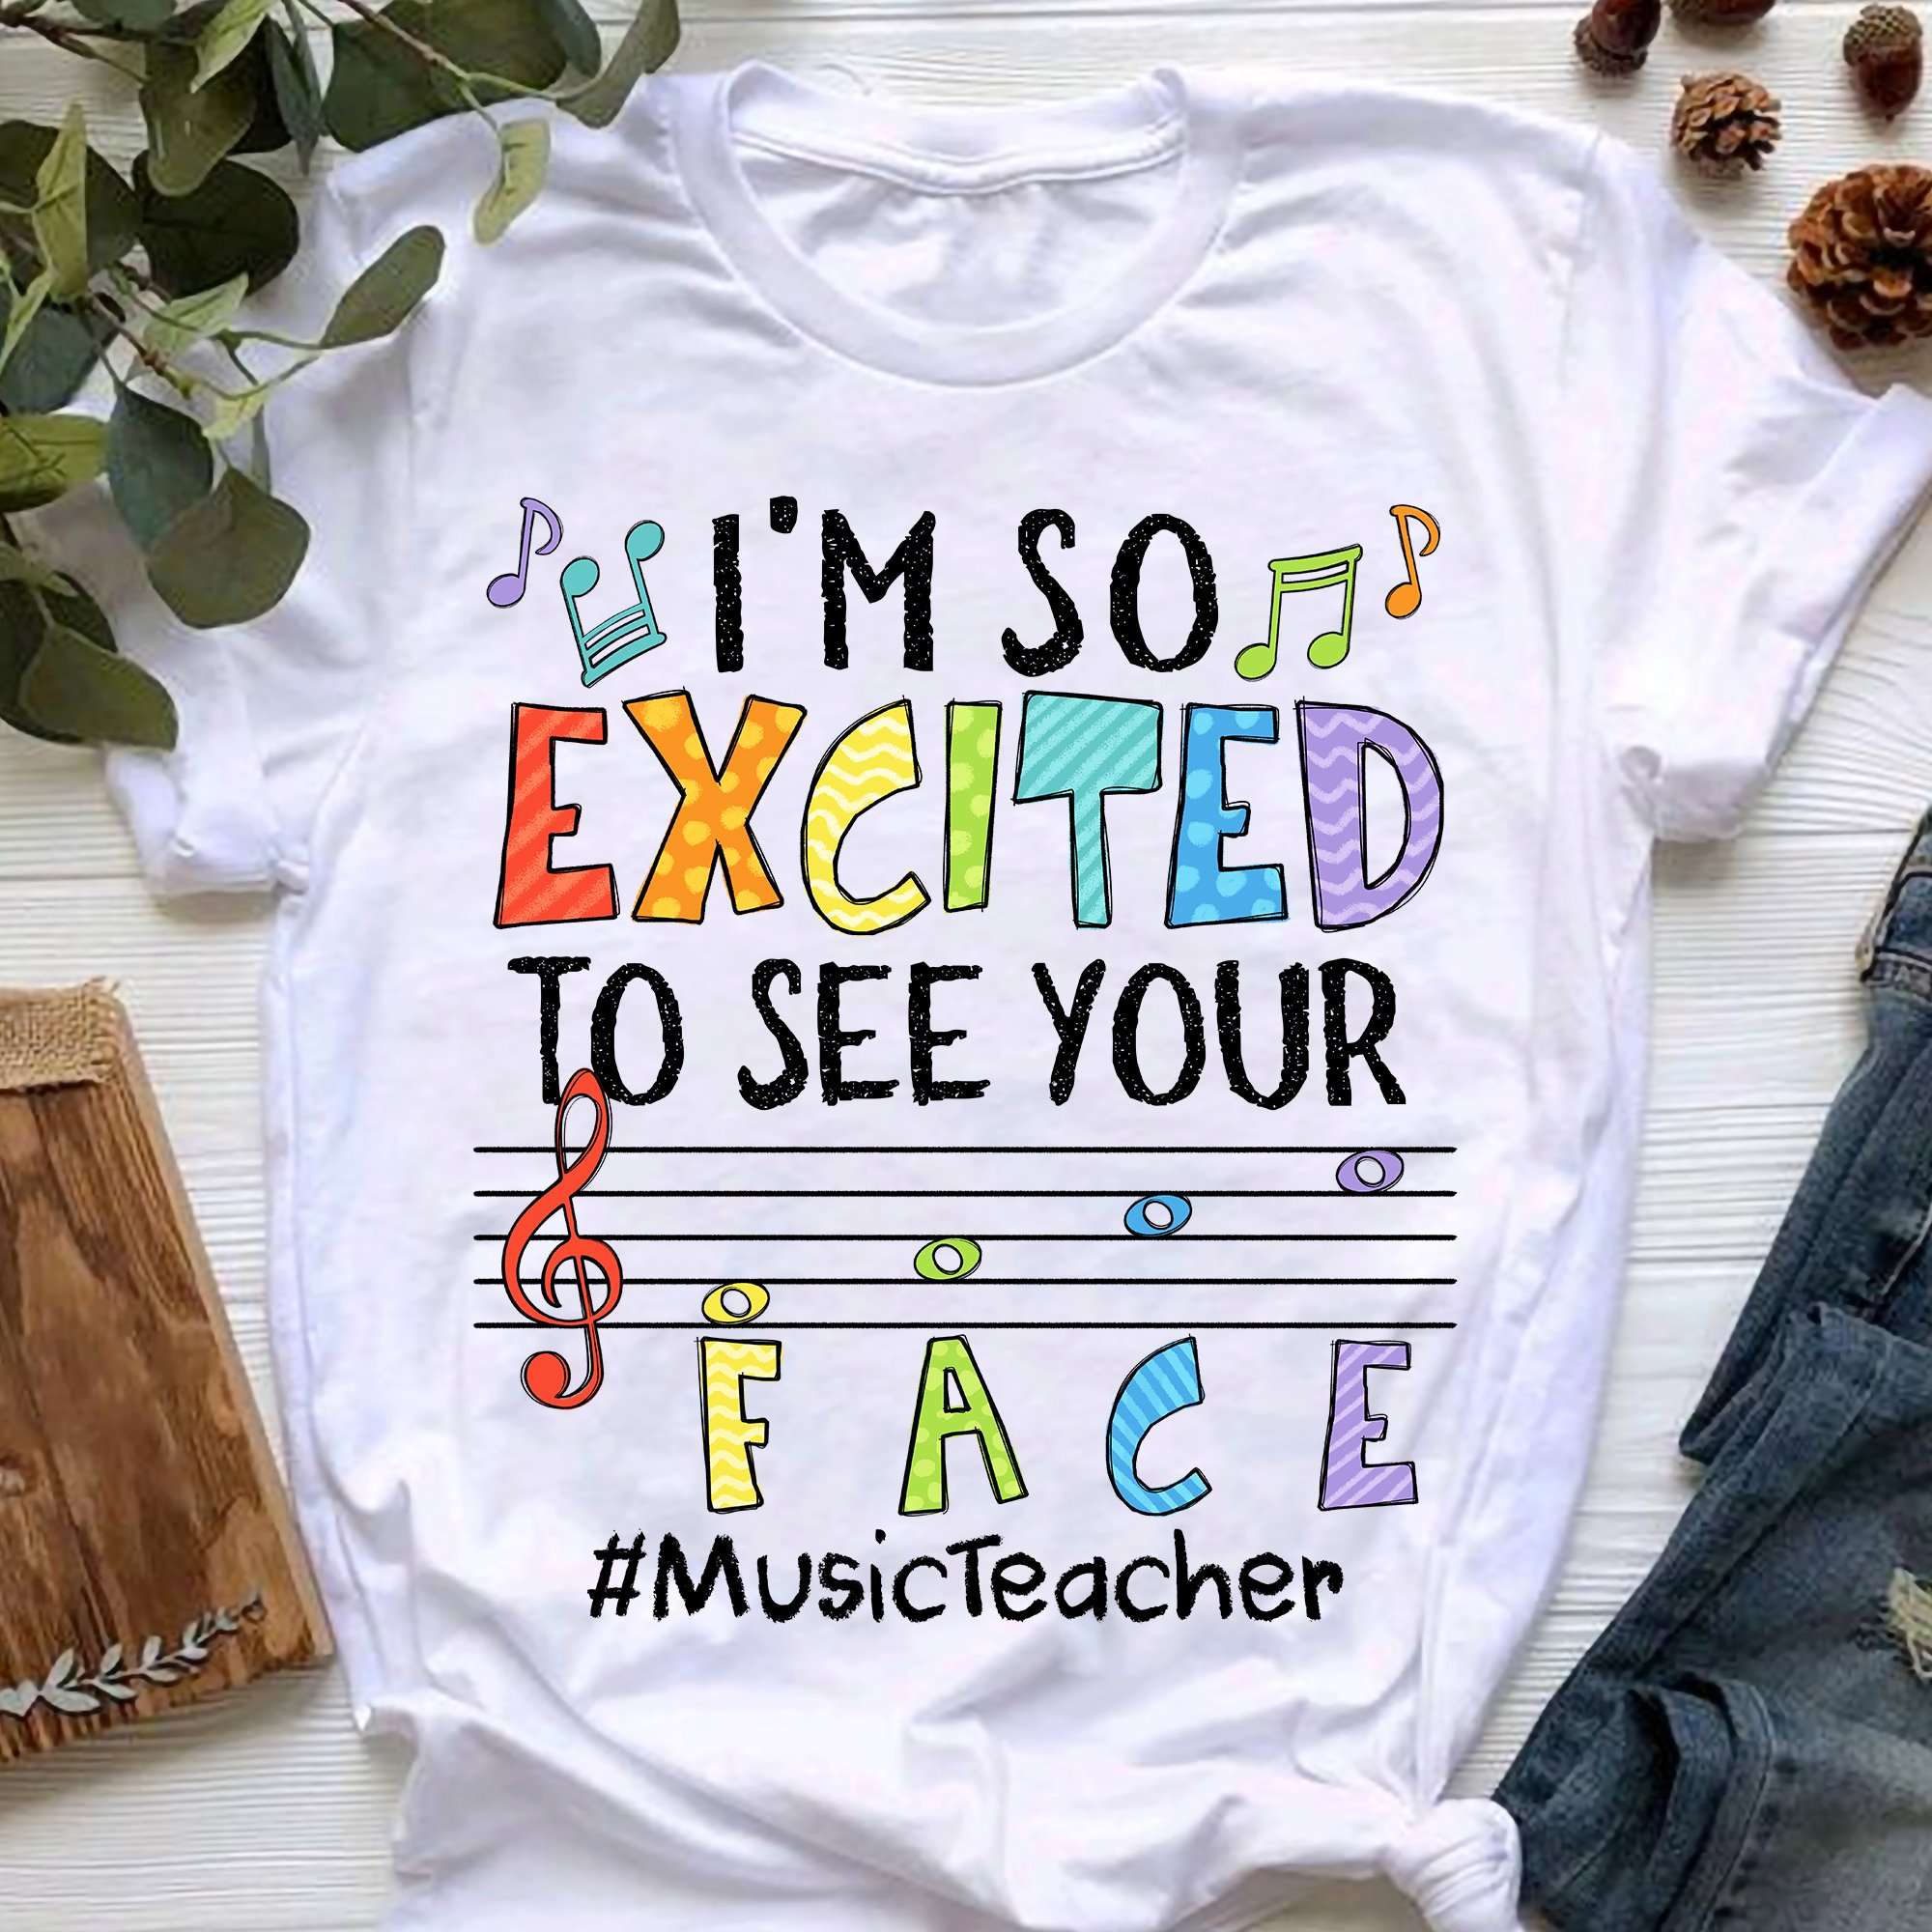 I'm so excited to see your face - Music teacher, teacher educational job